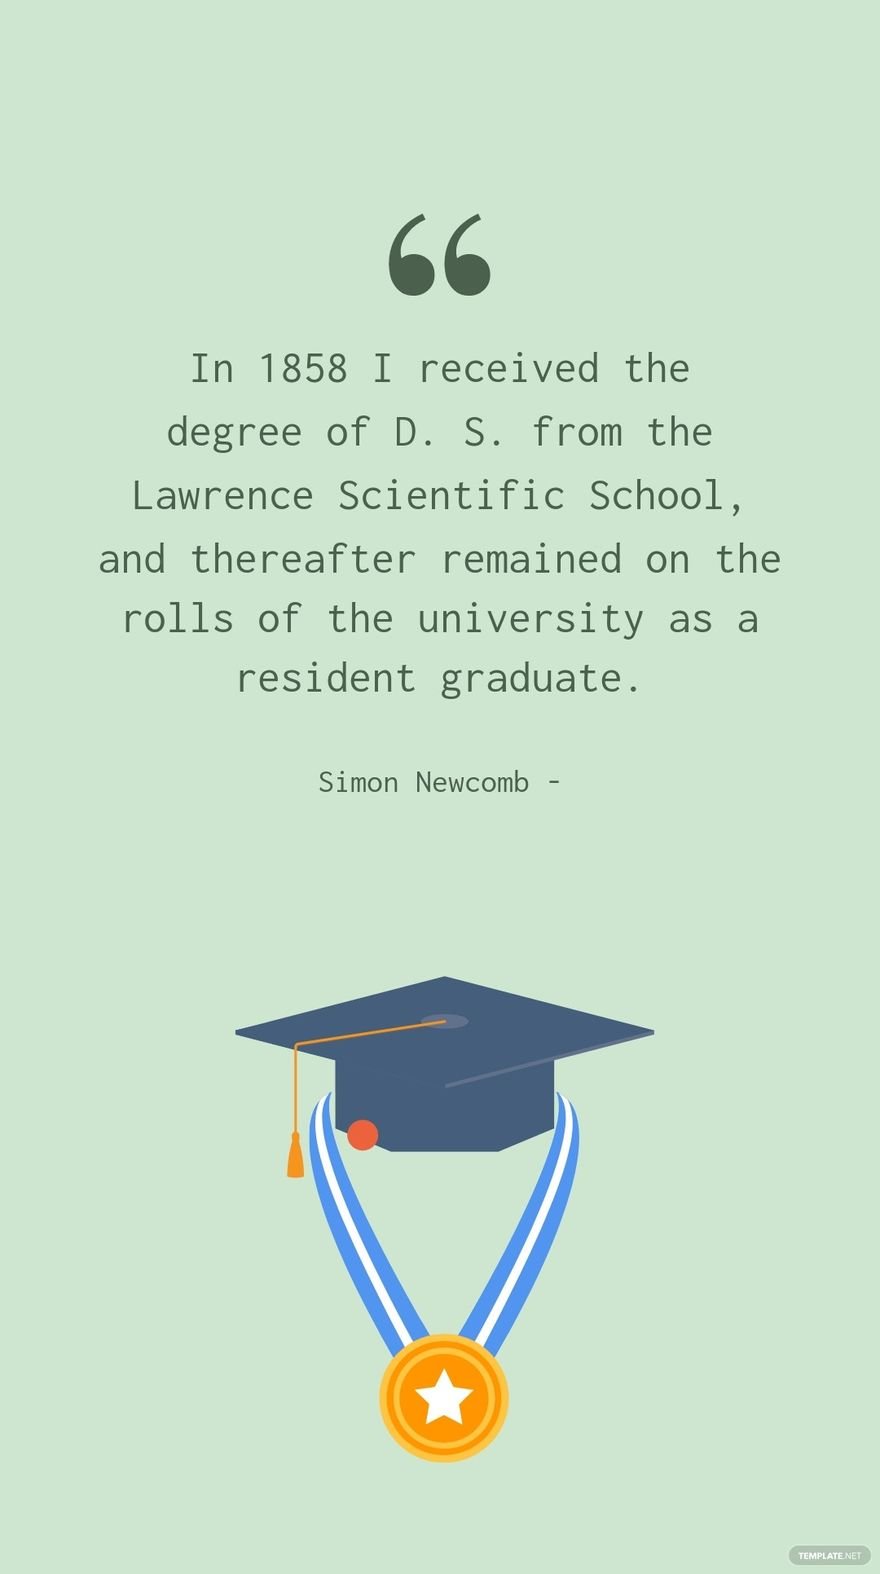 Simon Newcomb - In 1858 I received the degree of D. S. from the Lawrence Scientific School, and thereafter remained on the rolls of the university as a resident graduate. in JPG